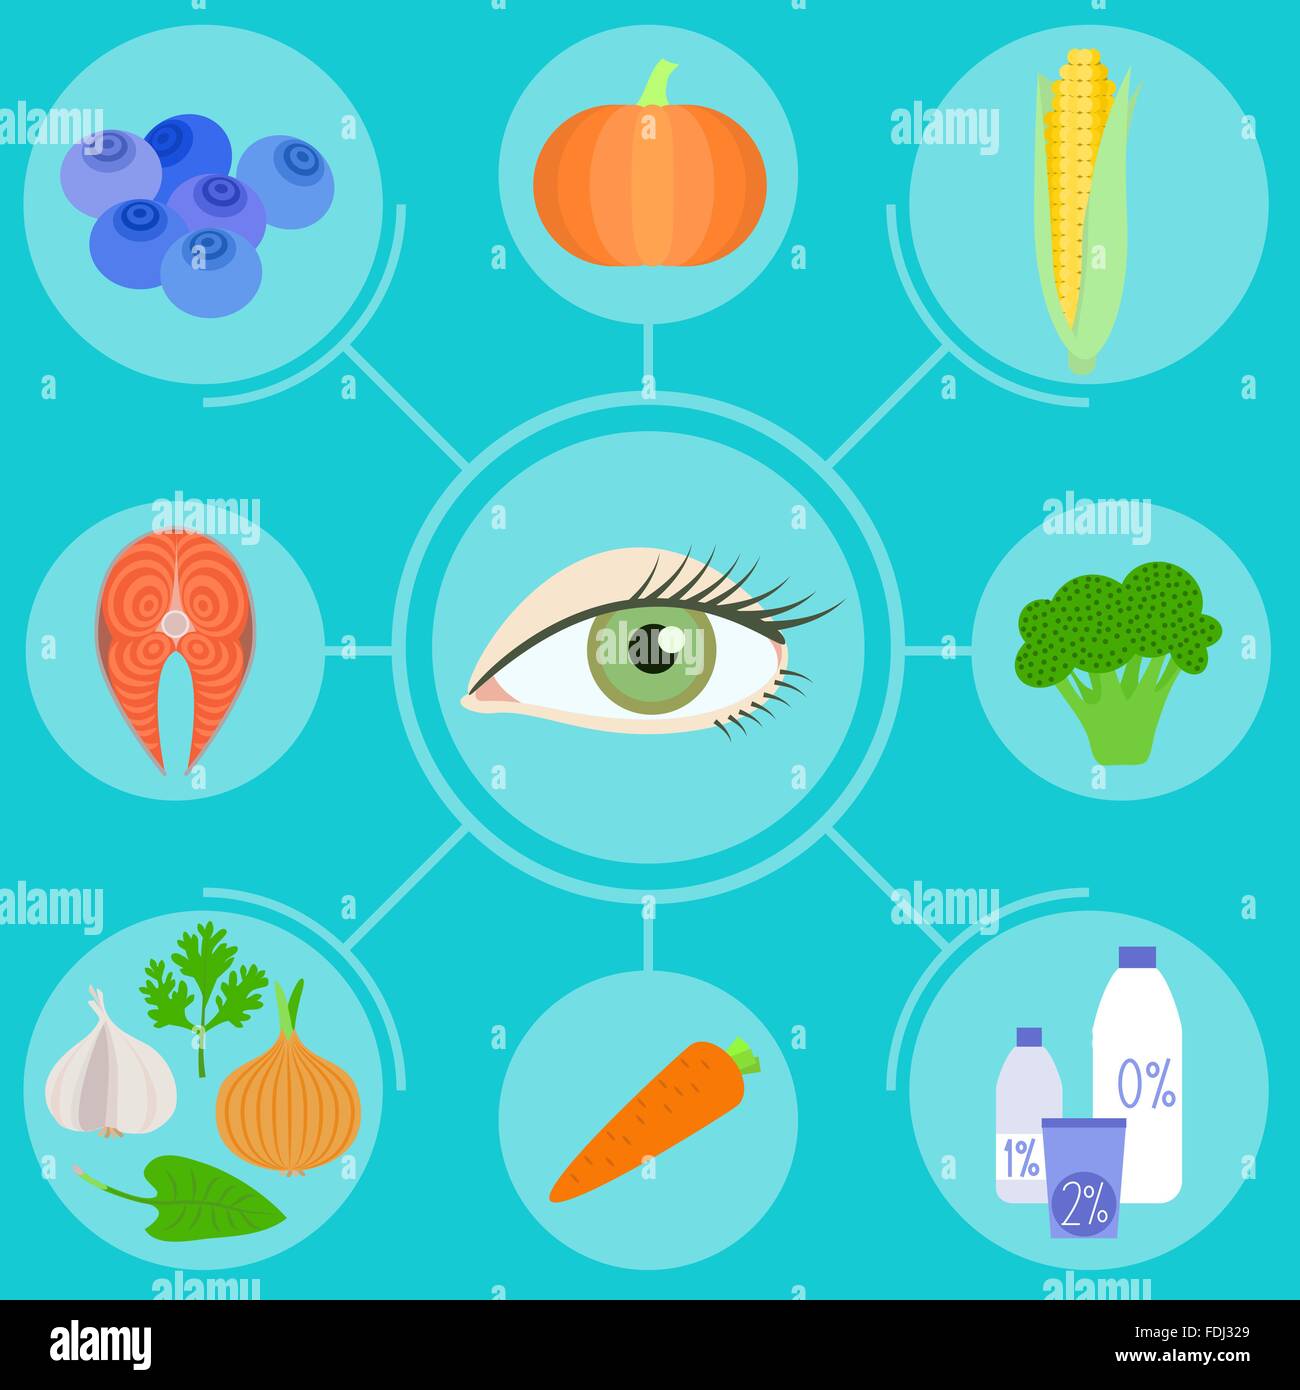 Infographics of food helpful for healthy eyes Stock Vector